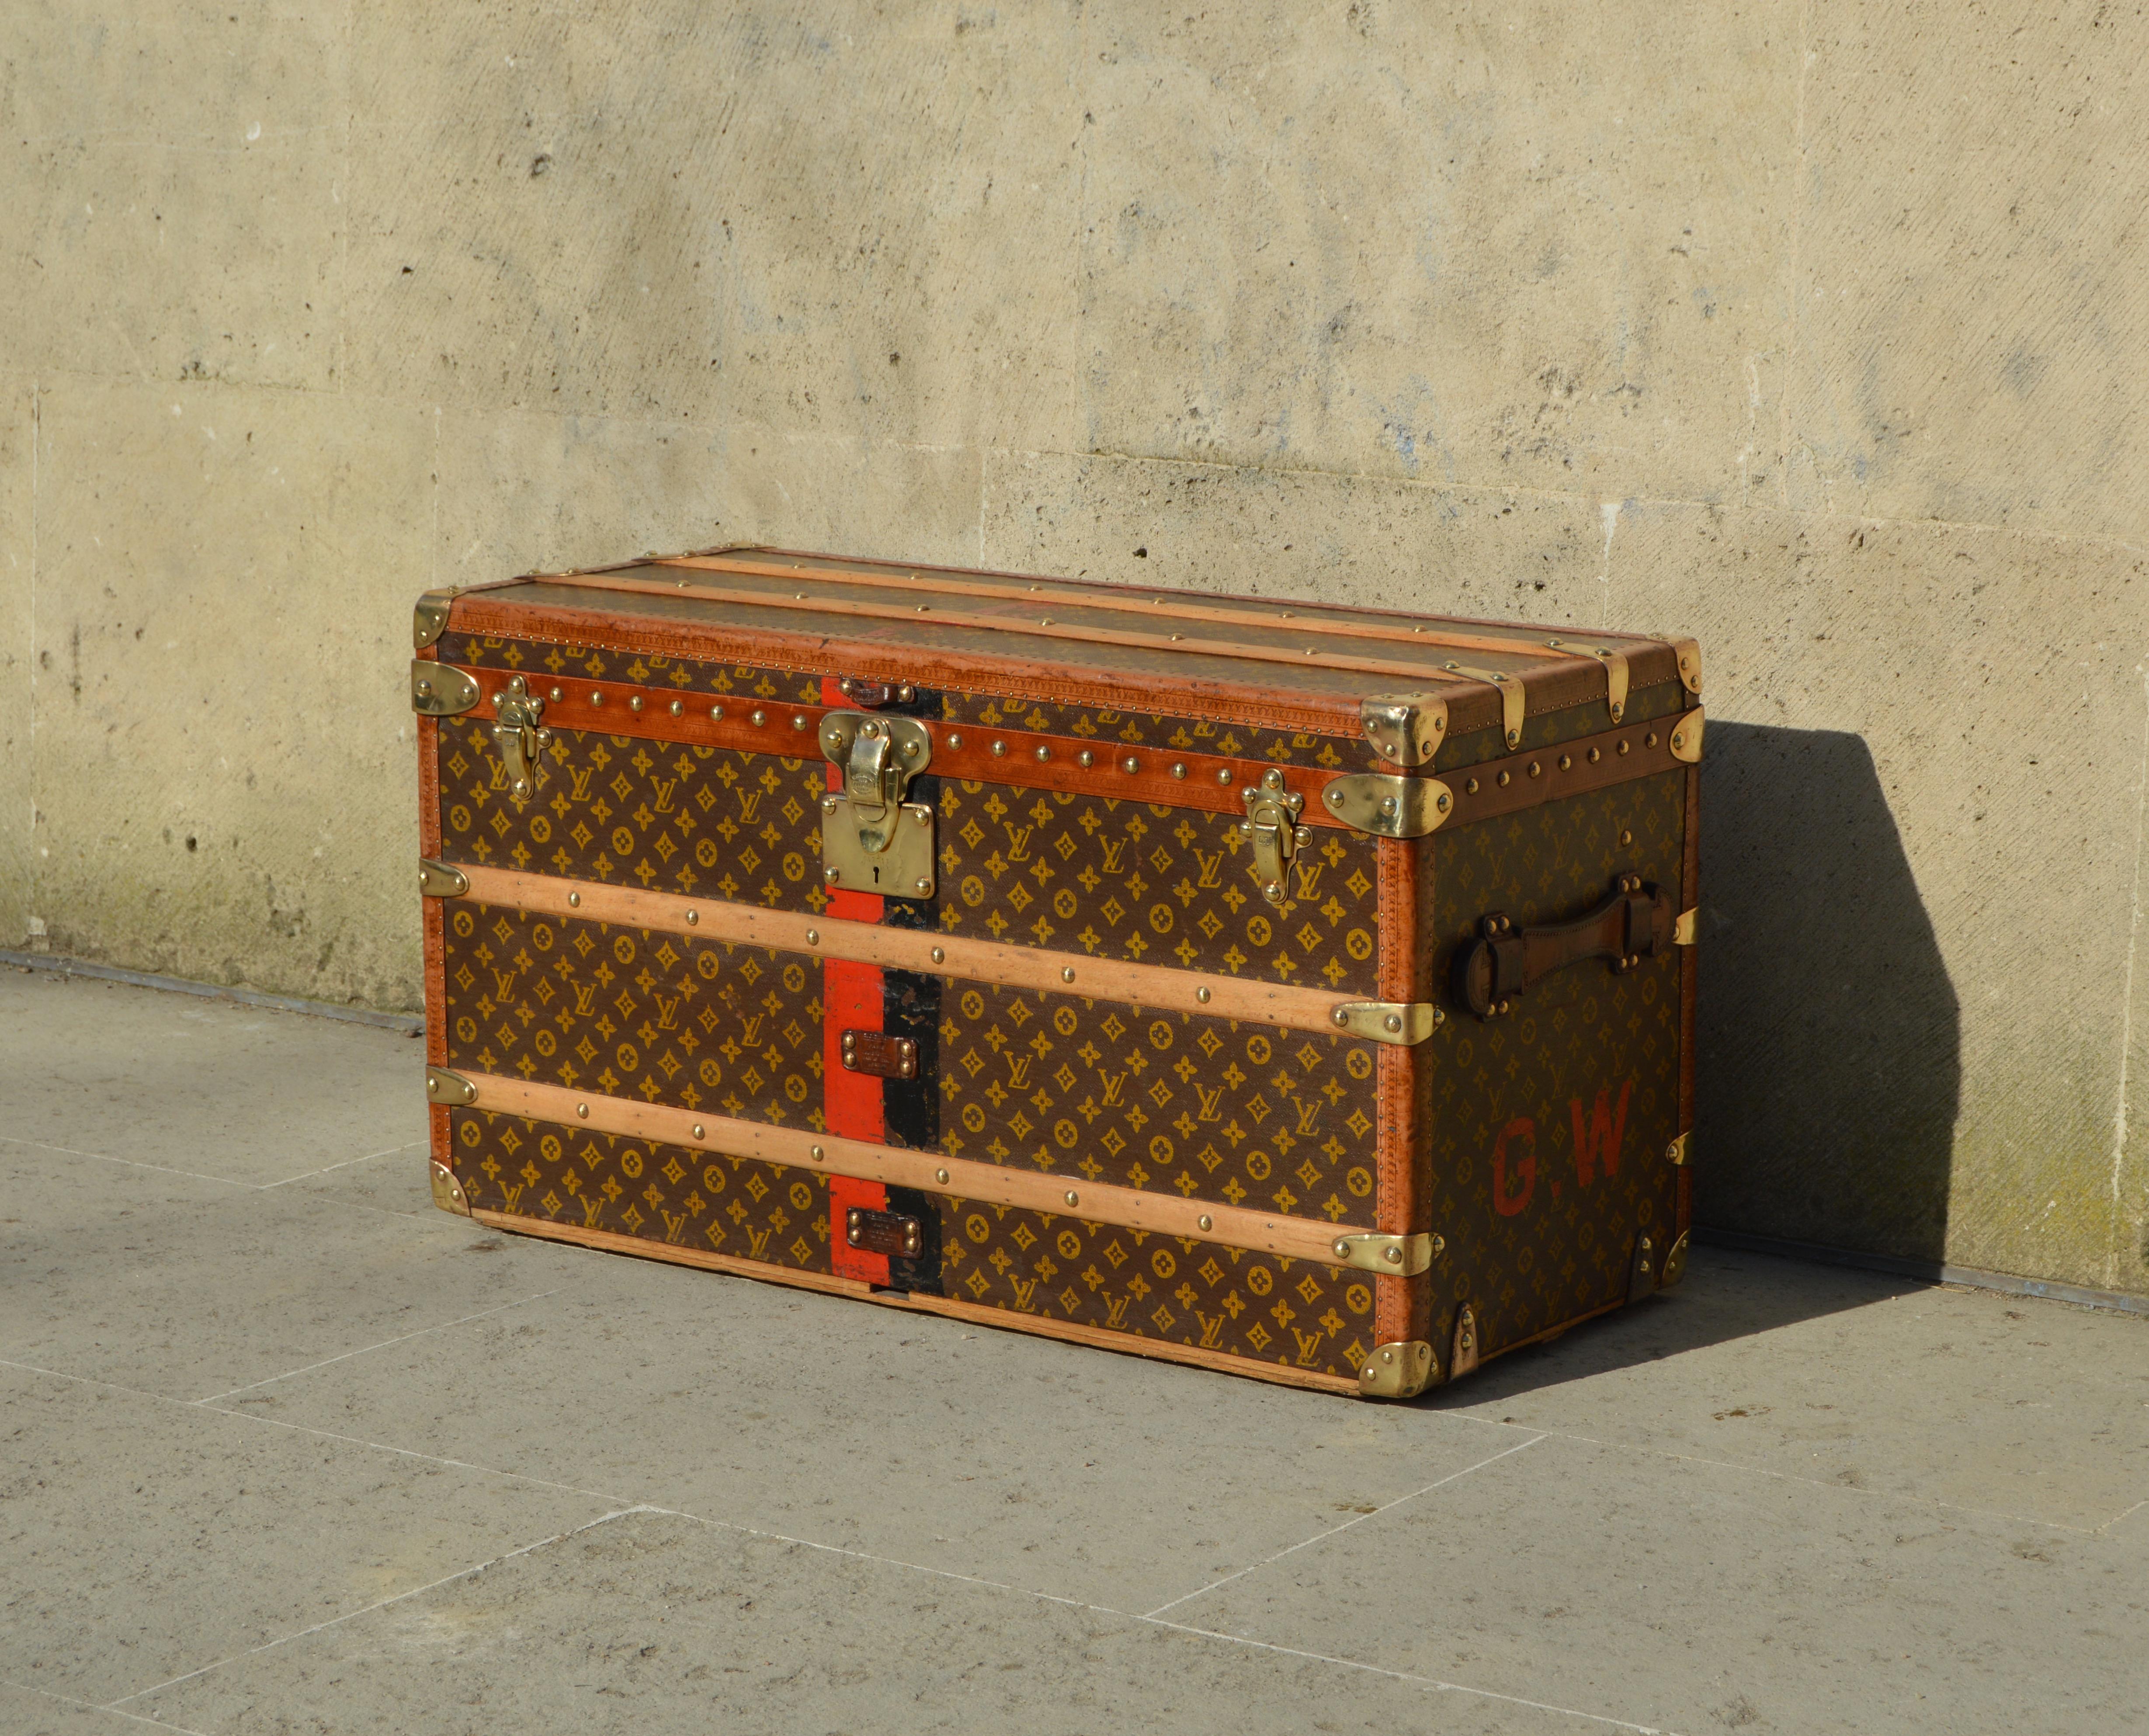 Beautiful Louis Vuitton trunk from 1922, originally used to store shoes, up to 14 pairs of shoes and/or 2 to 6 pairs of boots. Thanks to its original function, the proportions of this trunk are very practical today, it is not bulky but quite